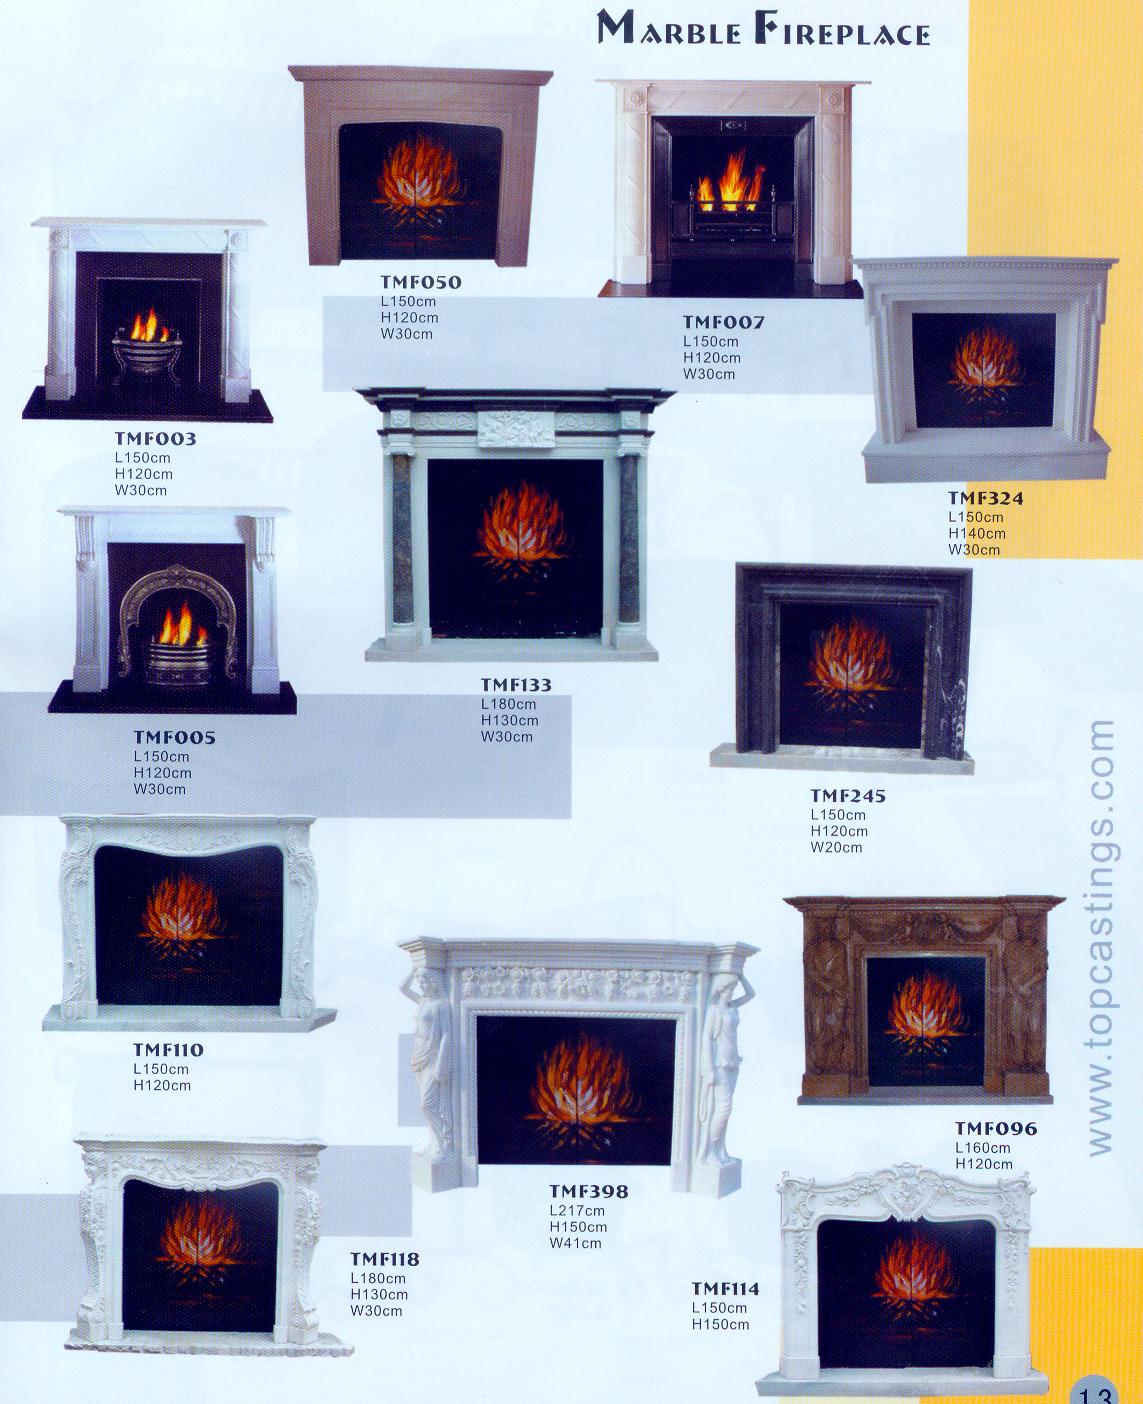 fireplace (marble/cast iron)